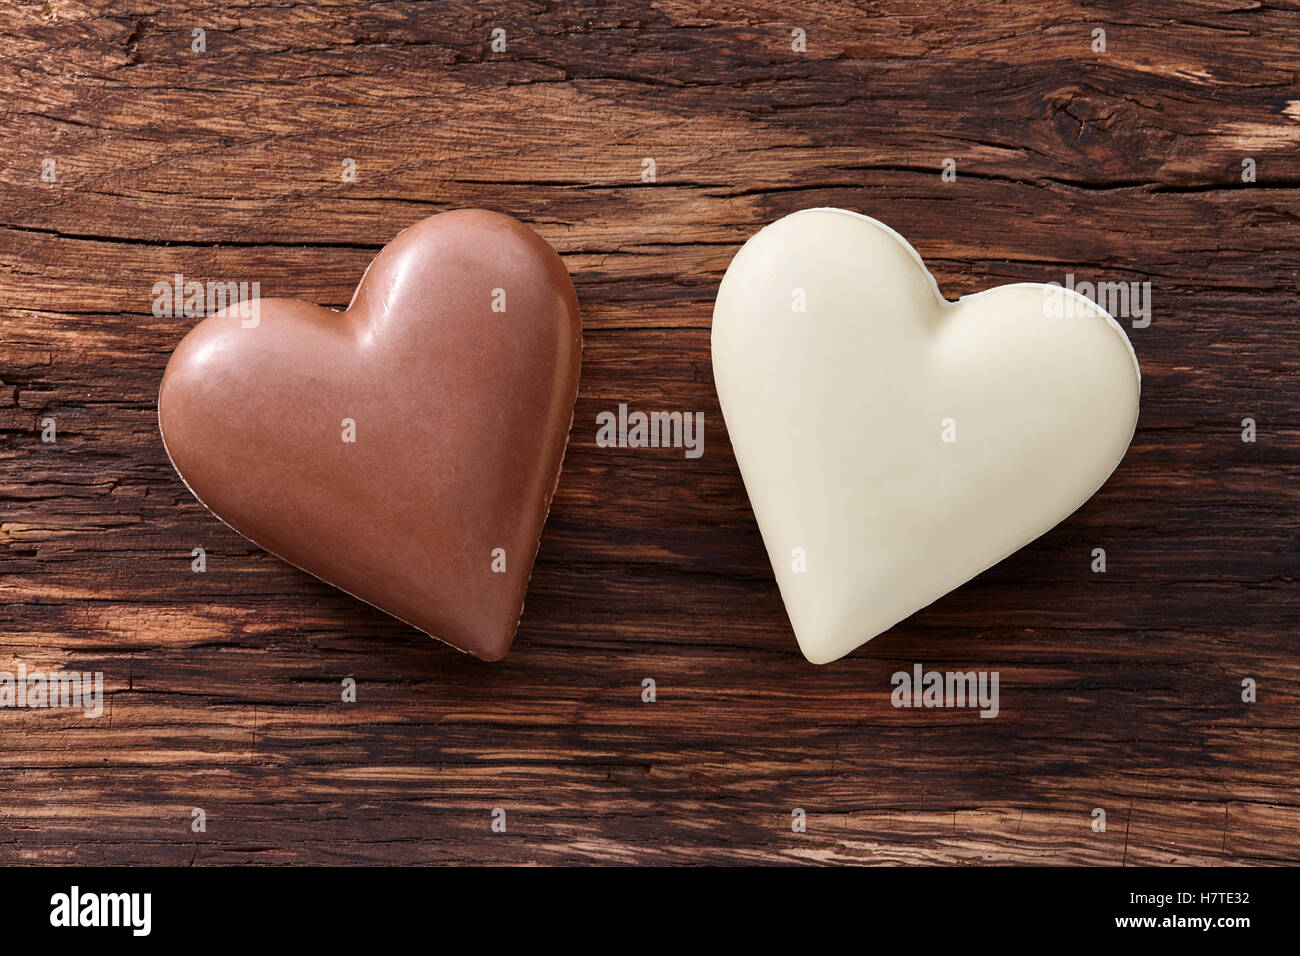 Chocolate hearts on wooden background Stock Photo